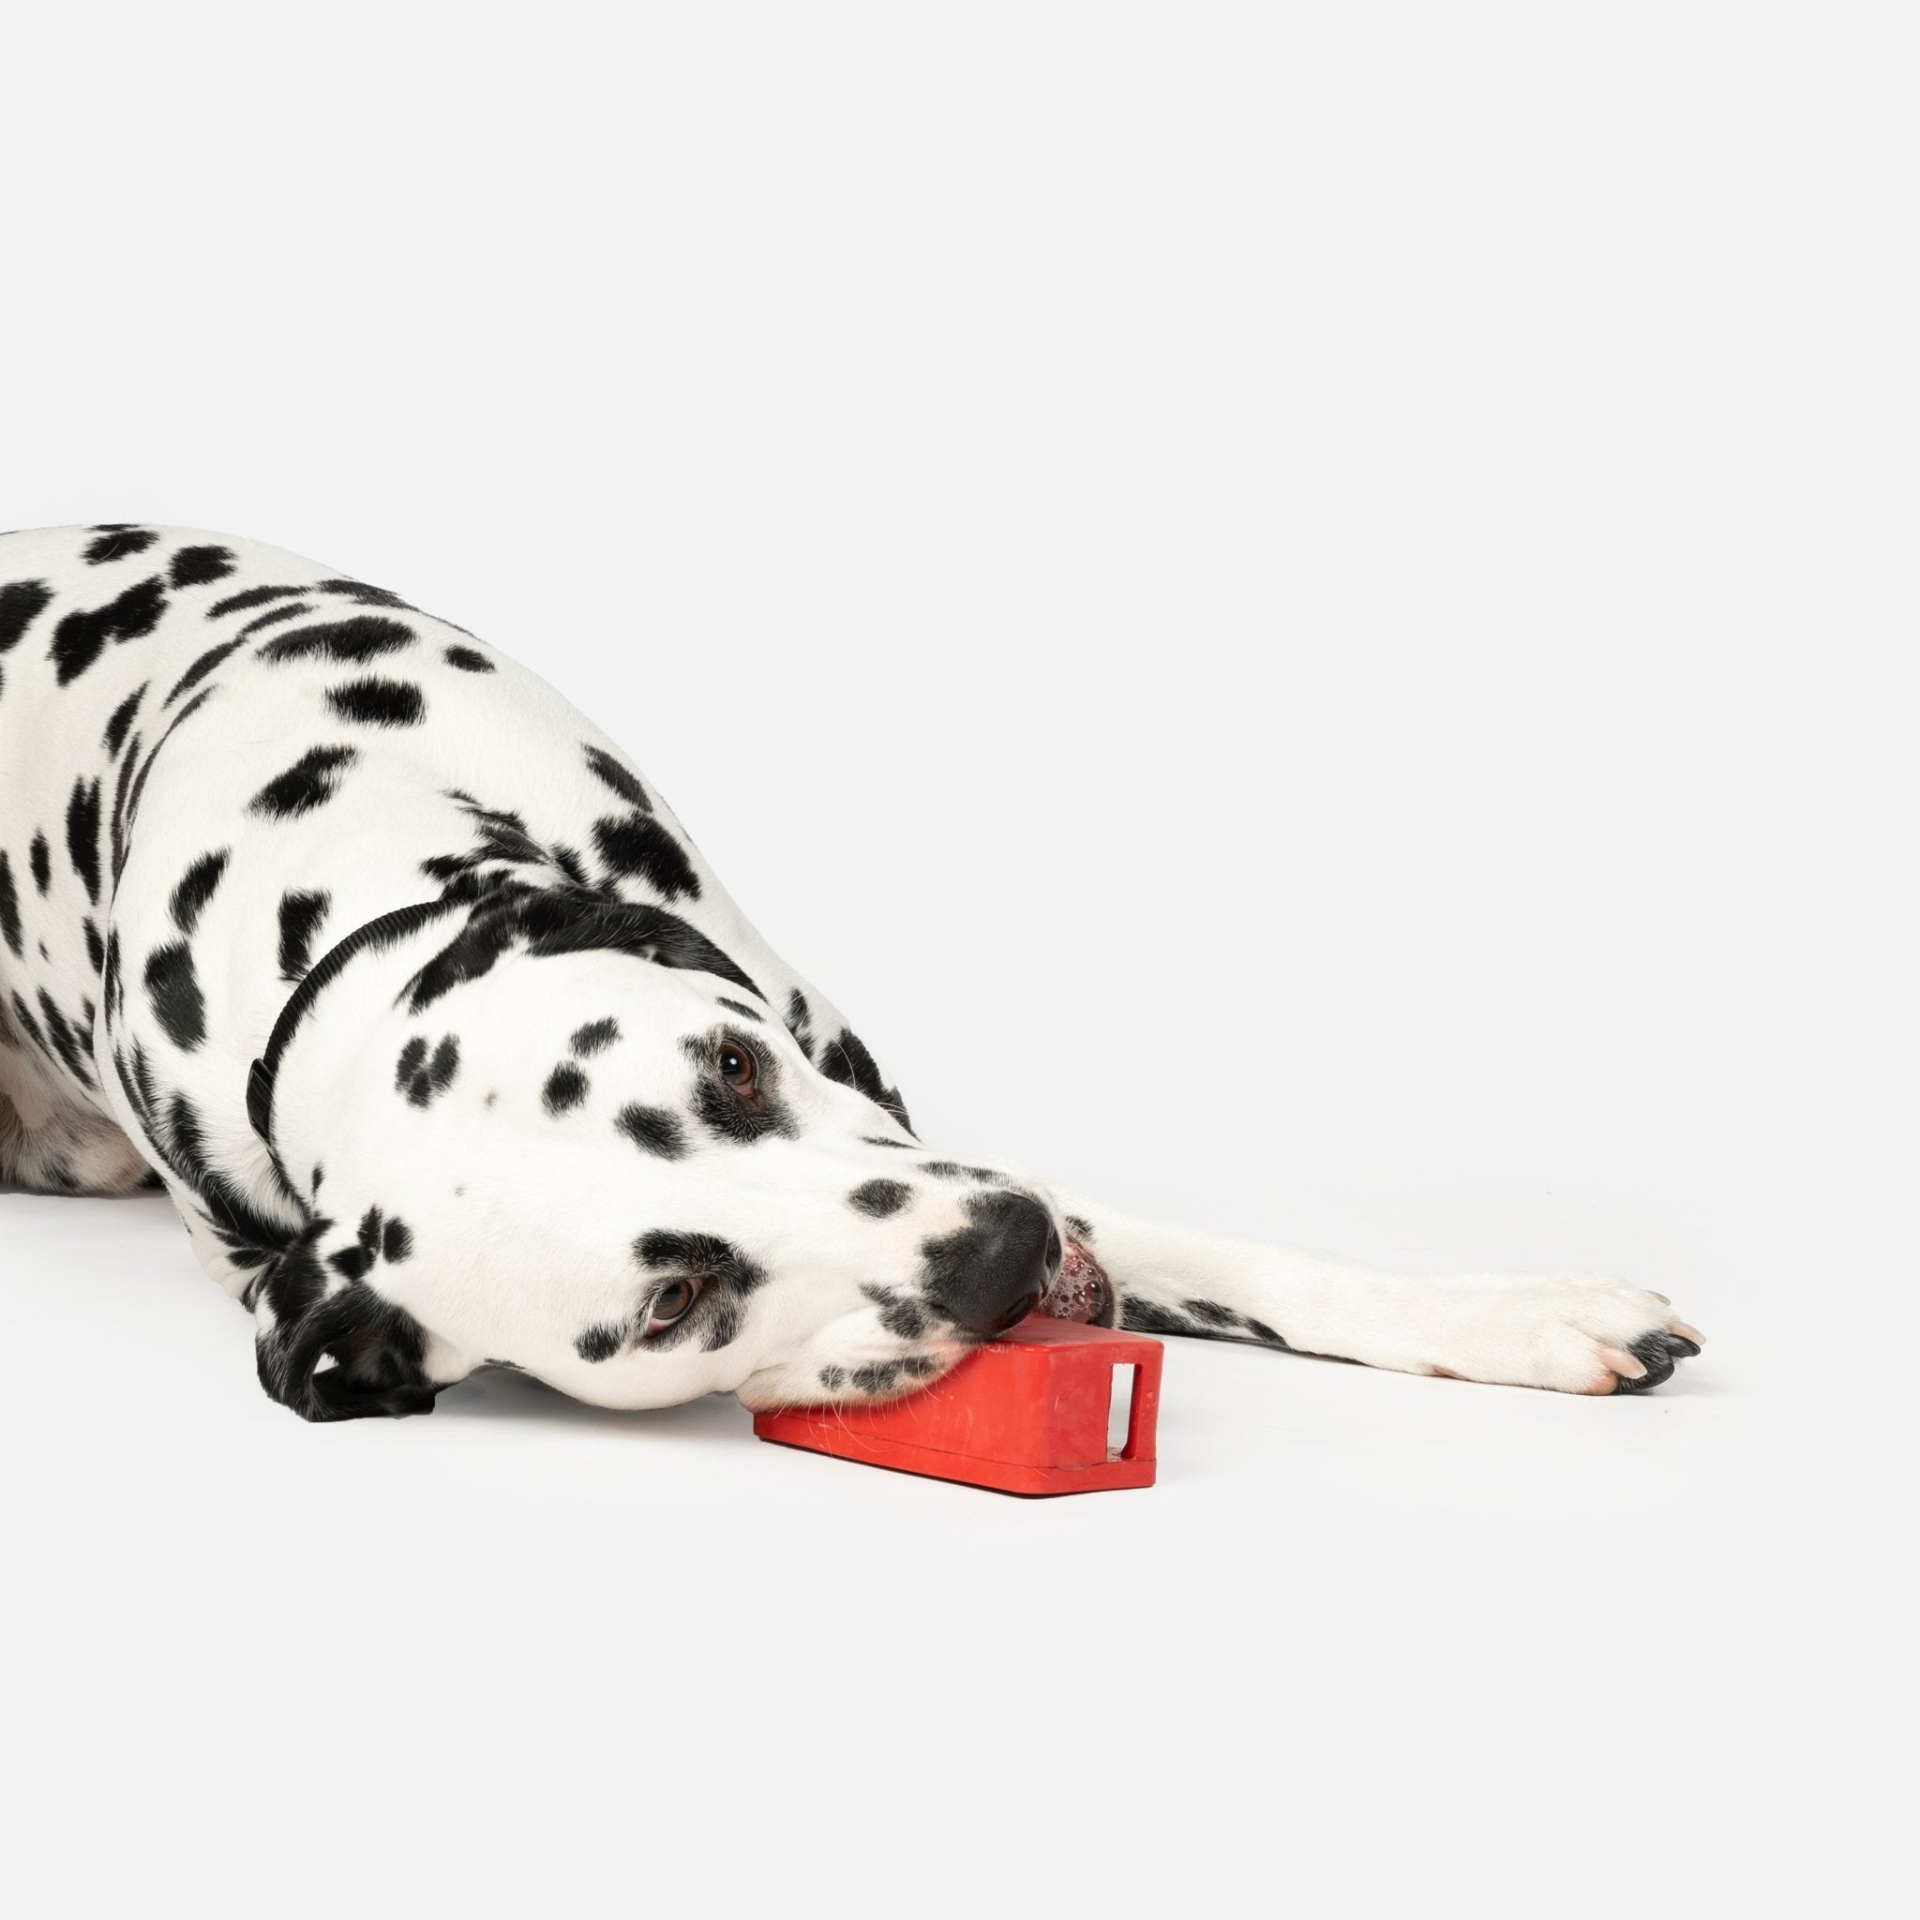 Speaker With Chicken Scent Dog Toy - Durable and Sustainable Rubber Toy for Dogs, Goodies N Stuff